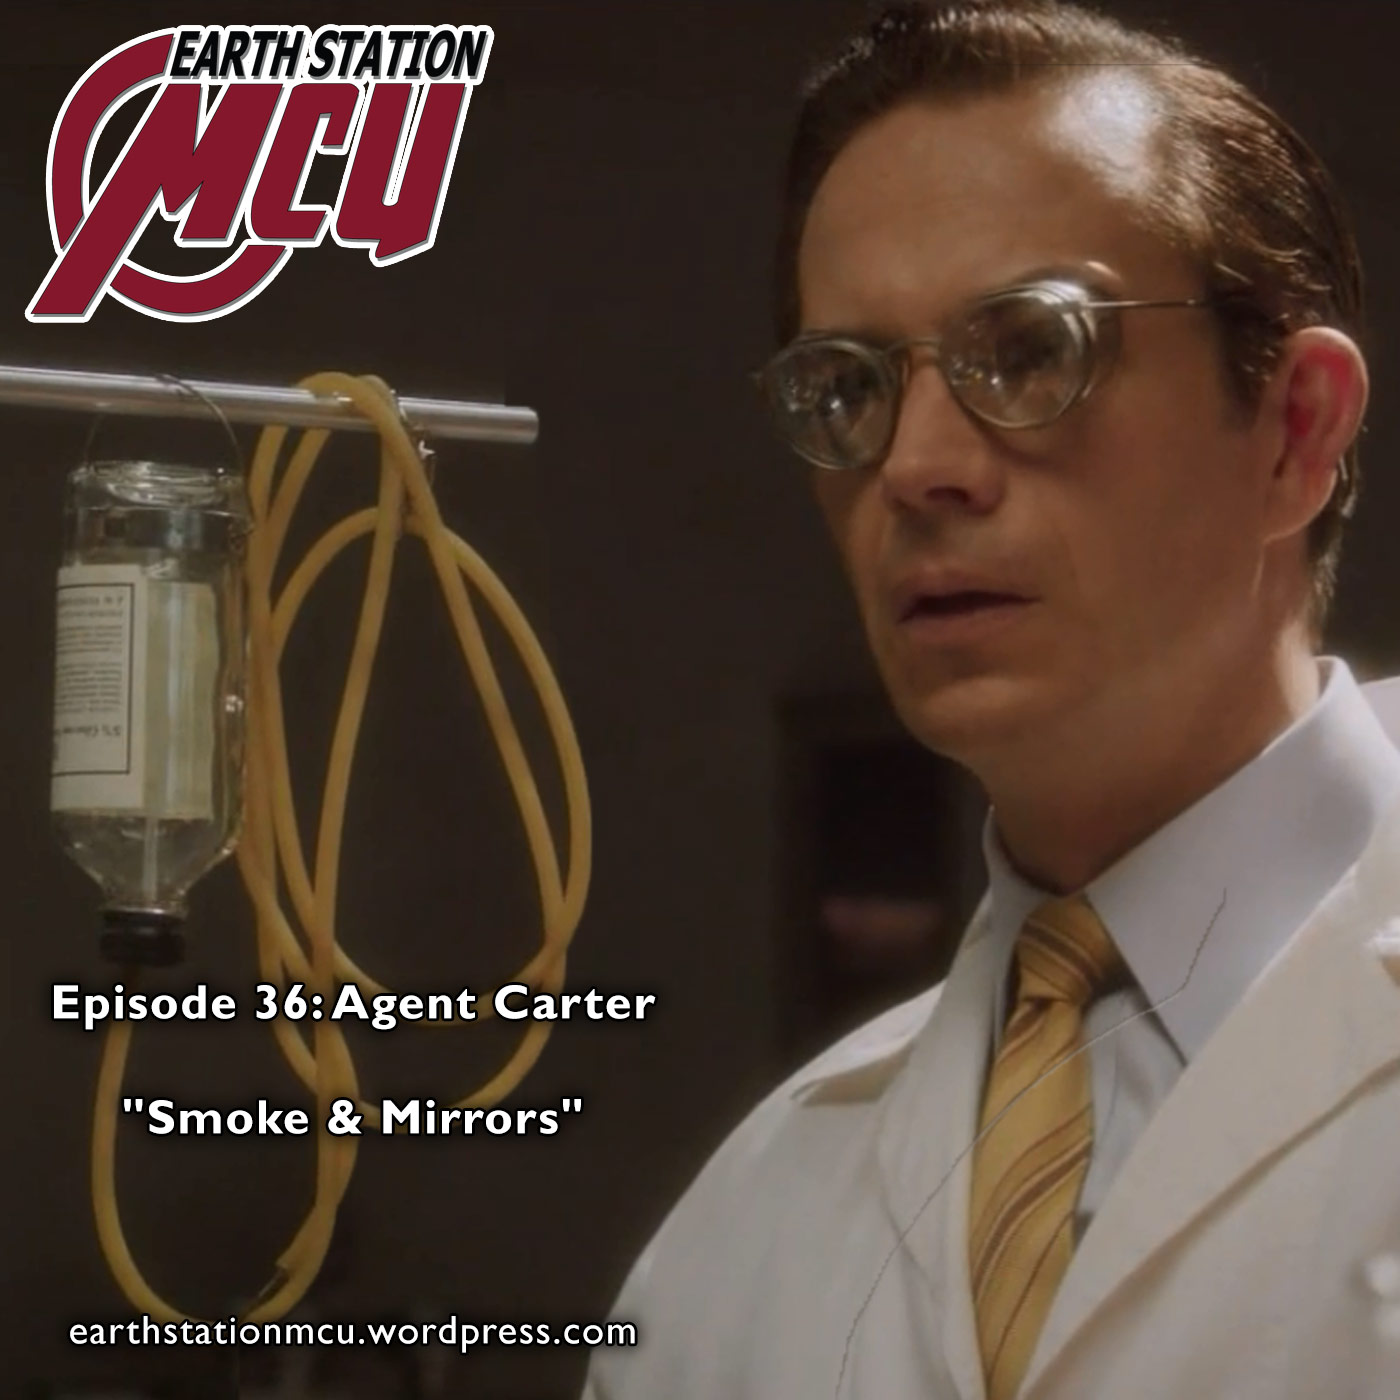 Earth Station MCU Episode 36: Agent Carter, ”Smoke and Mirrors”